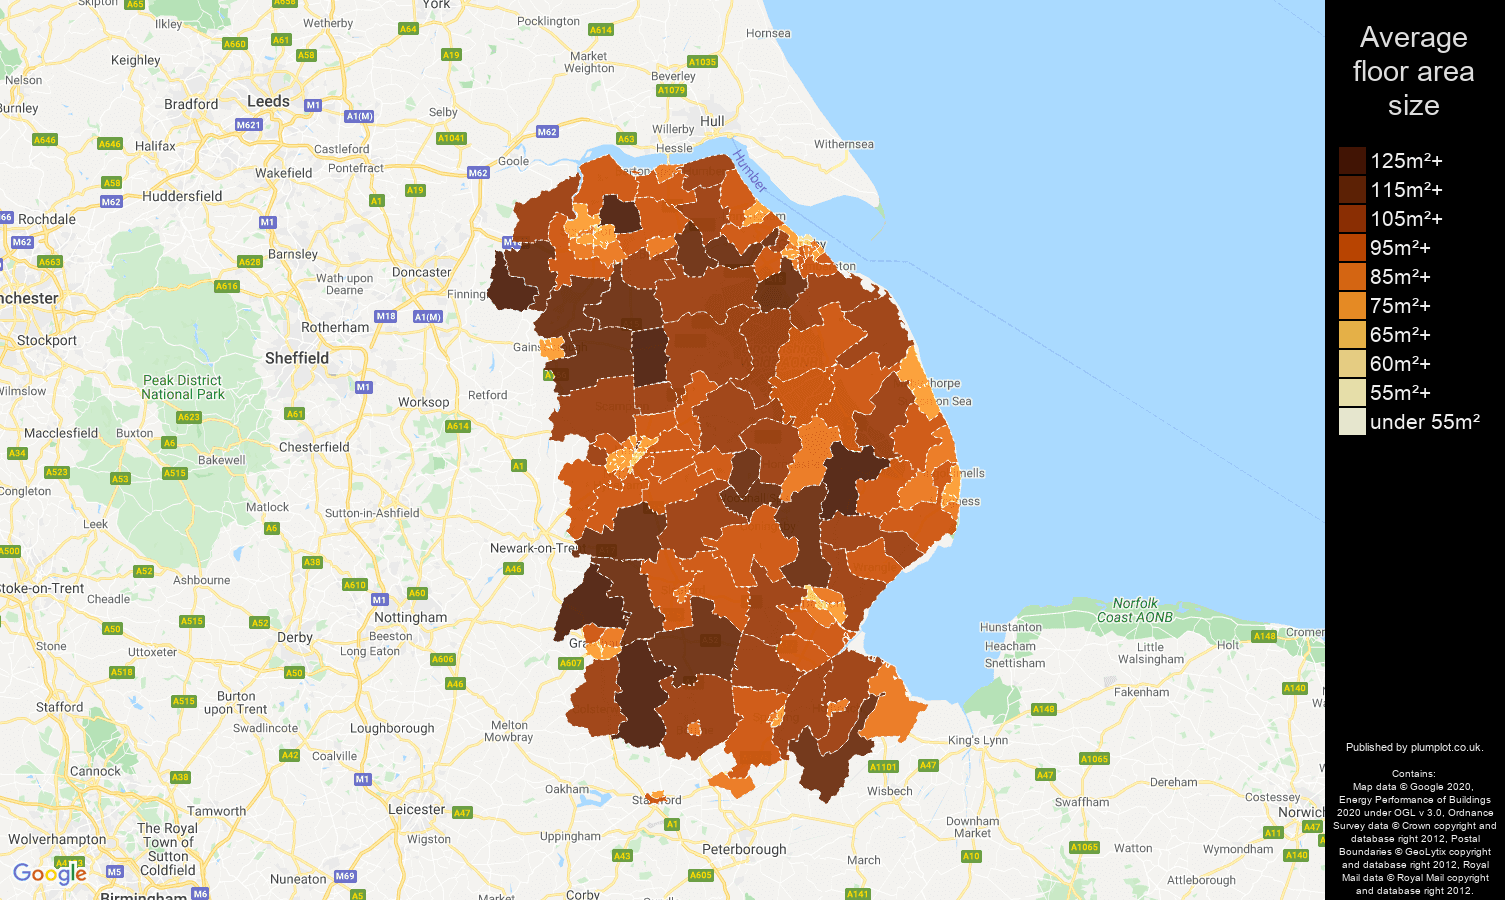 Lincolnshire map of average floor area size of properties